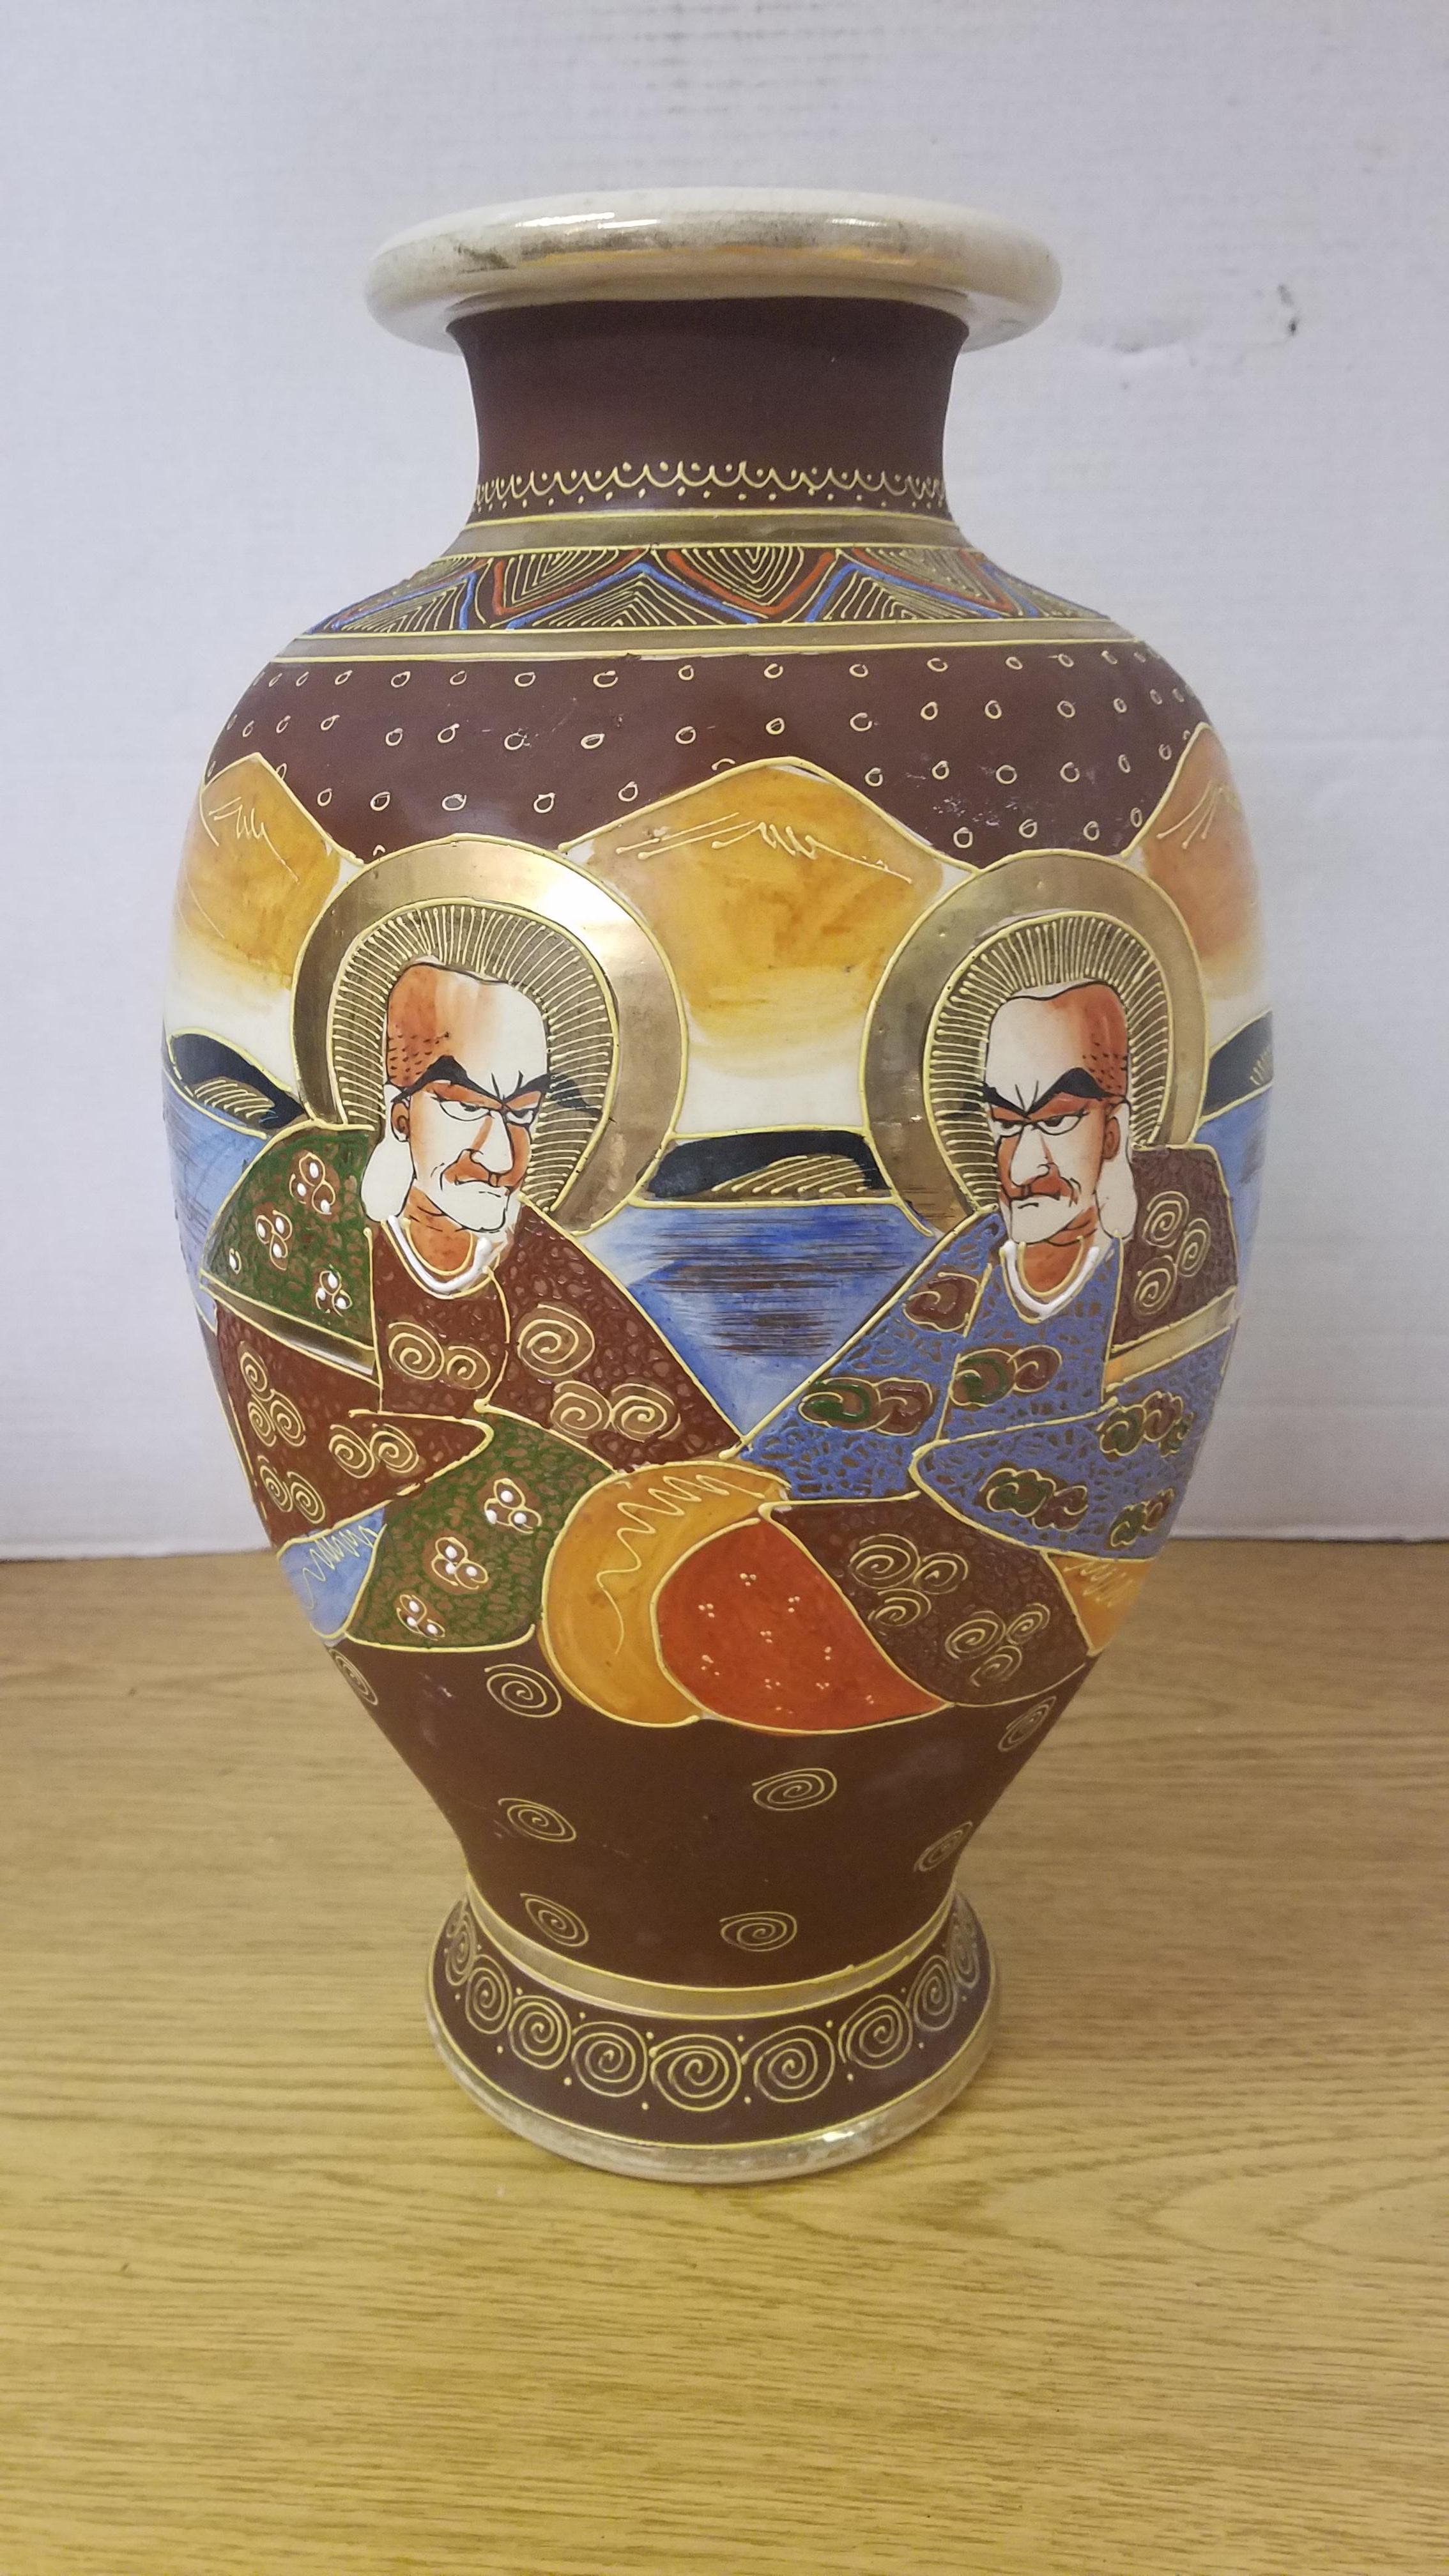 Beautifully detailed and hand painted Japanese Satsuma vase. Matte Burgundy background with vibrant gold gilding. Some of the gilding is raised for a 3 dimensional look. There is also raised painted details in small dotting throughout the vase. See